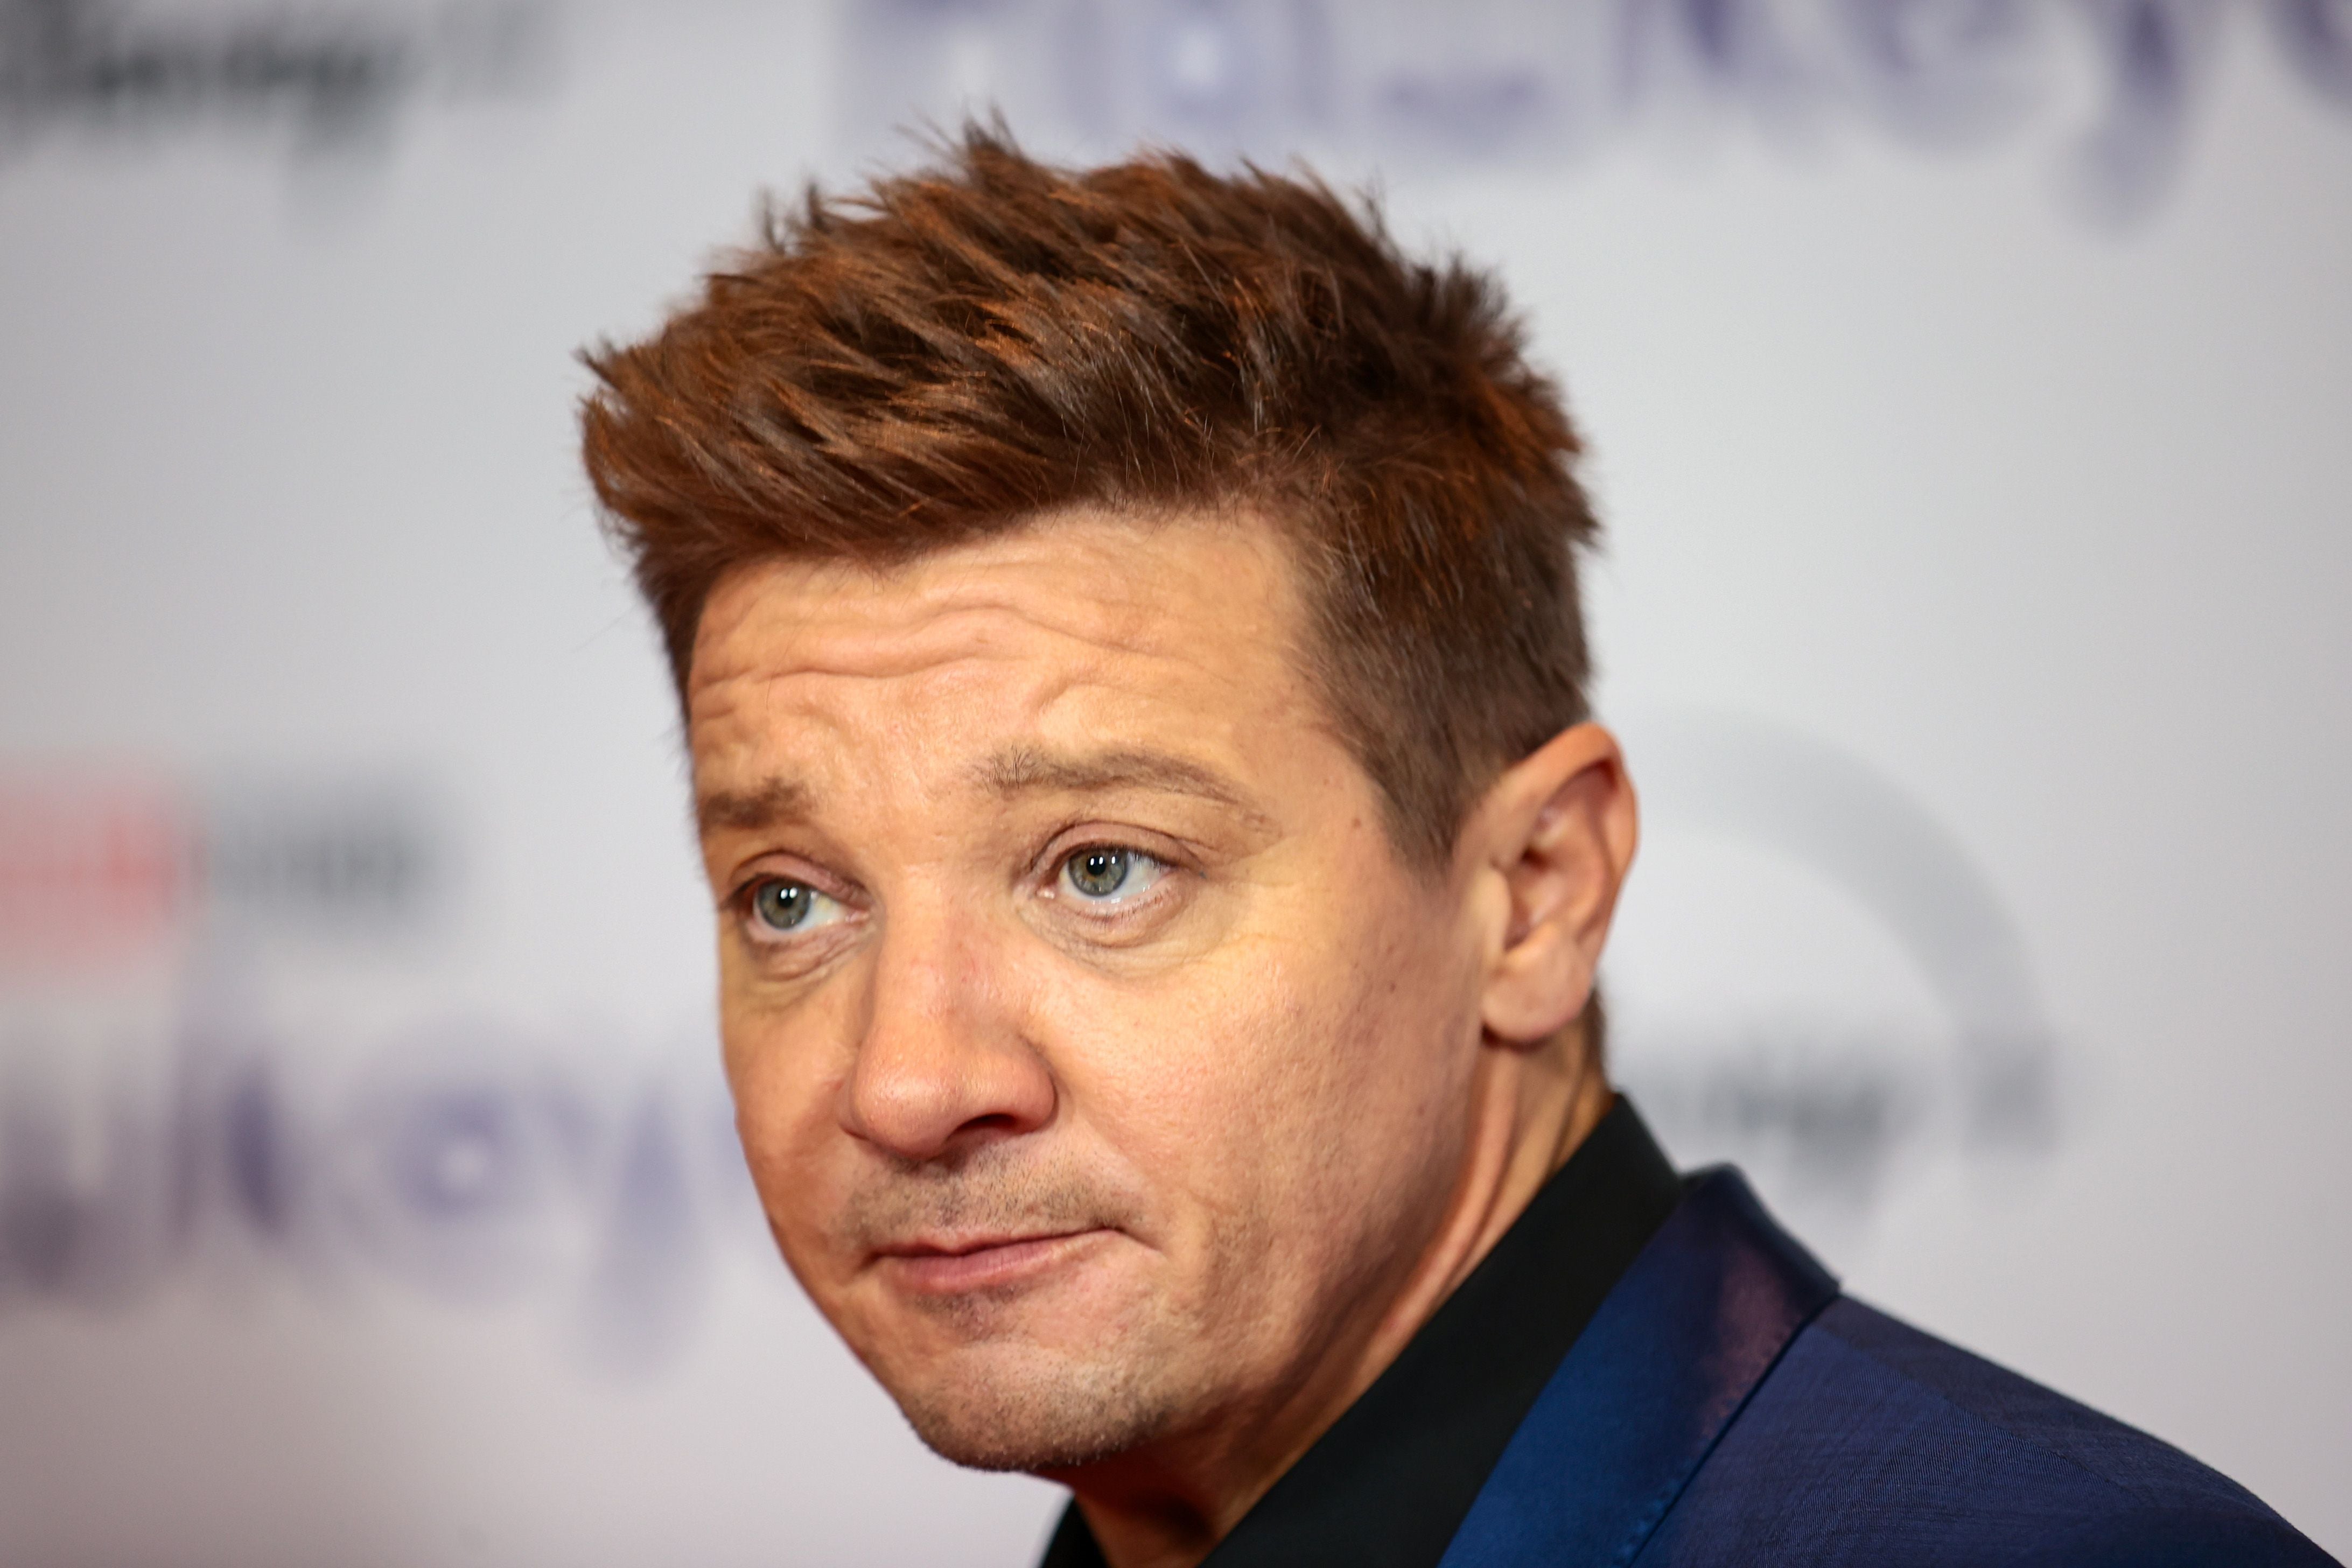 Jeremy Renner attends the ‘Hawkeye’ Special Screening in 2021